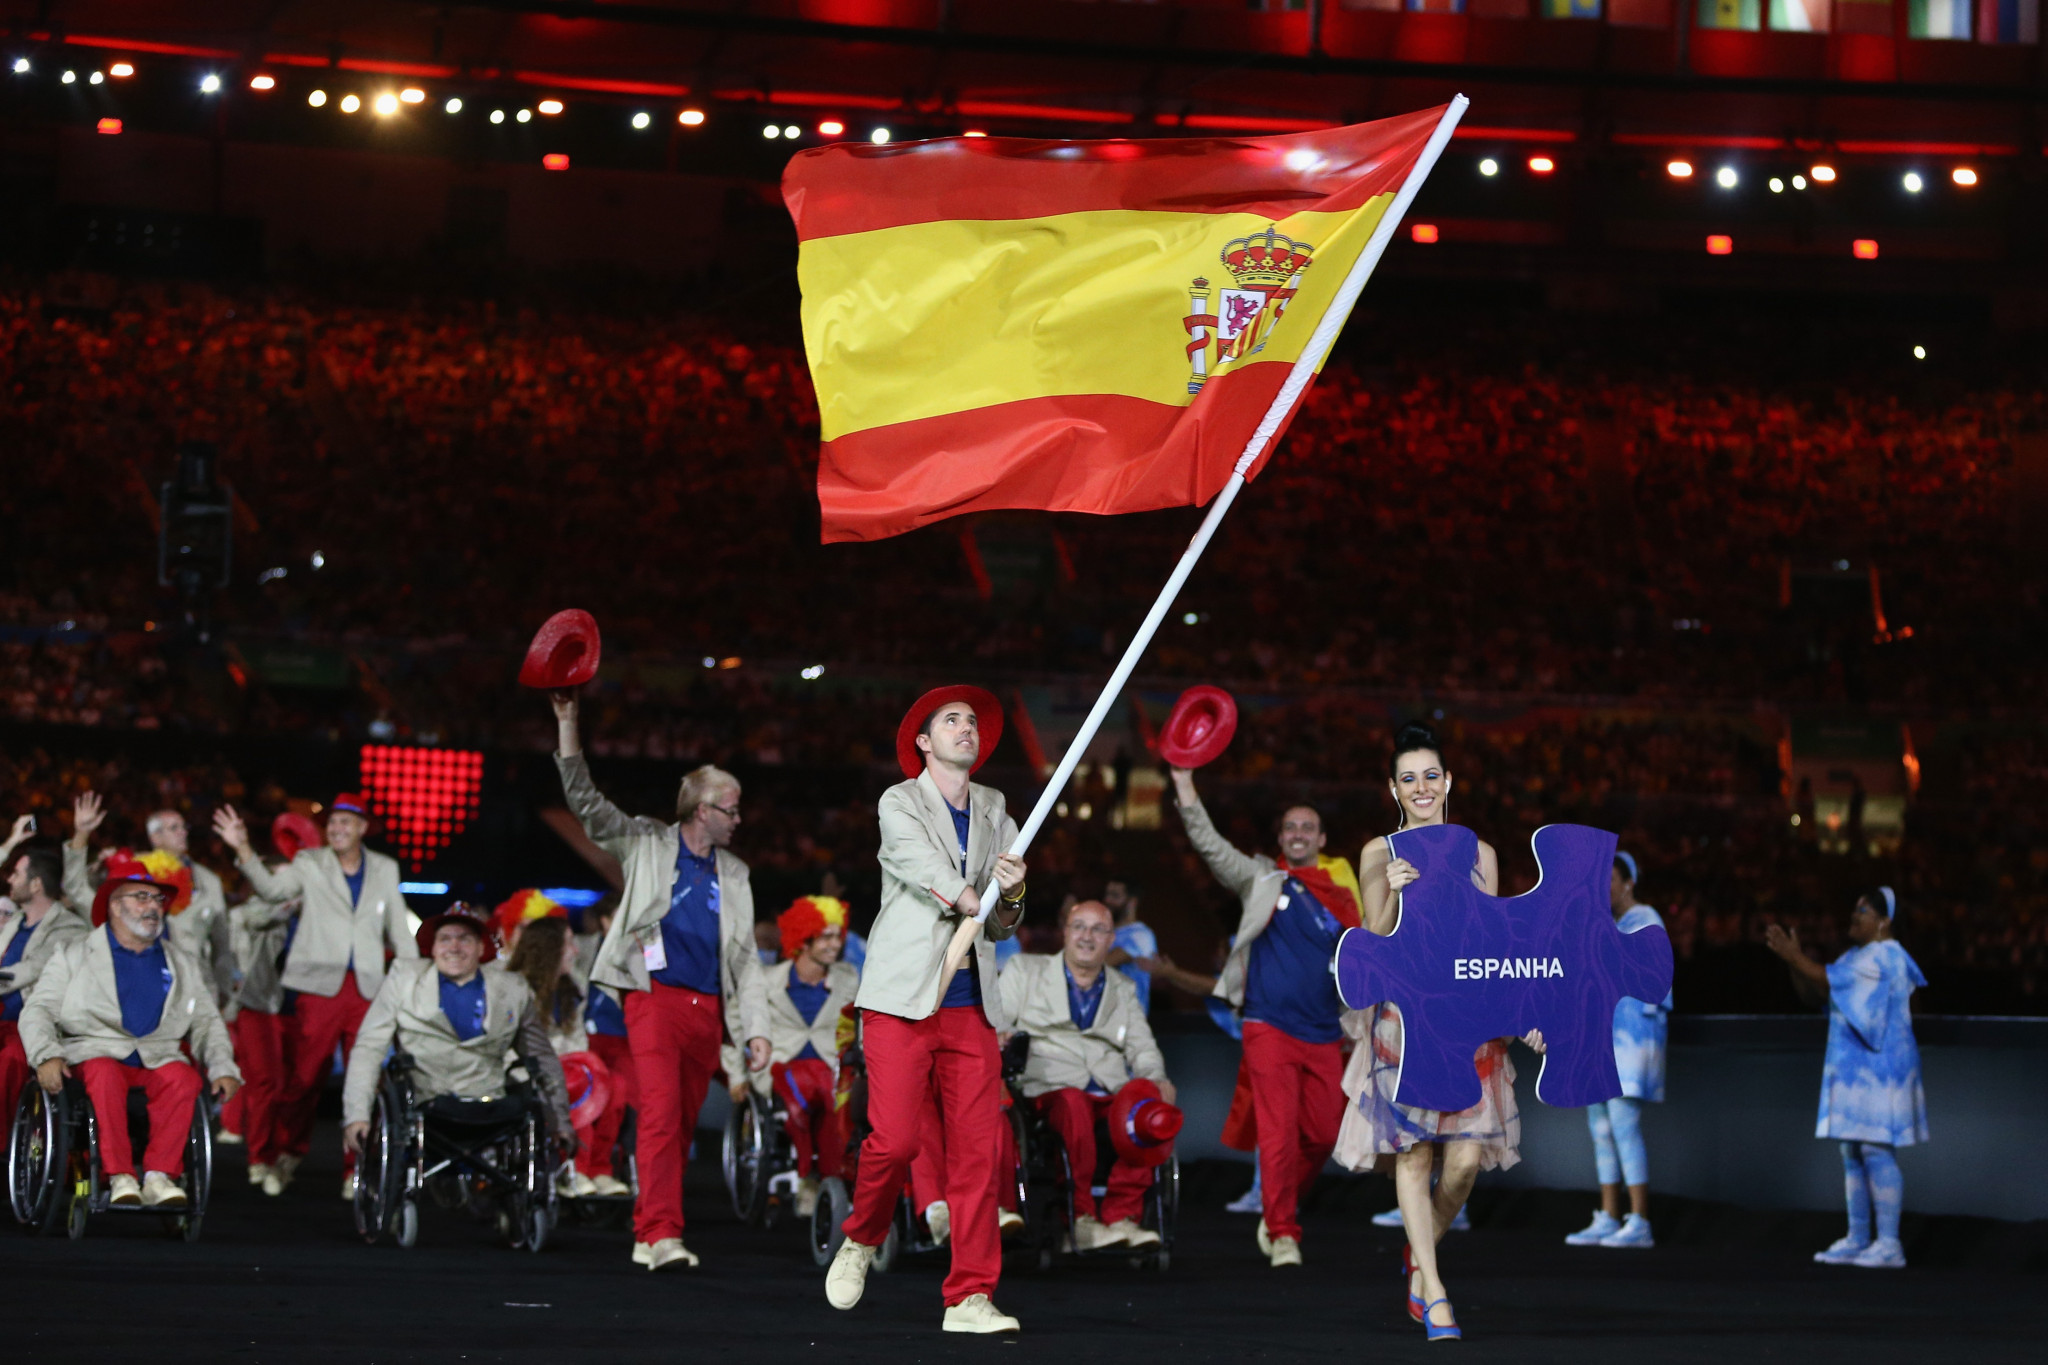 The Spanish Paralympic Committee has partnered with Dingonatura ©Getty Images